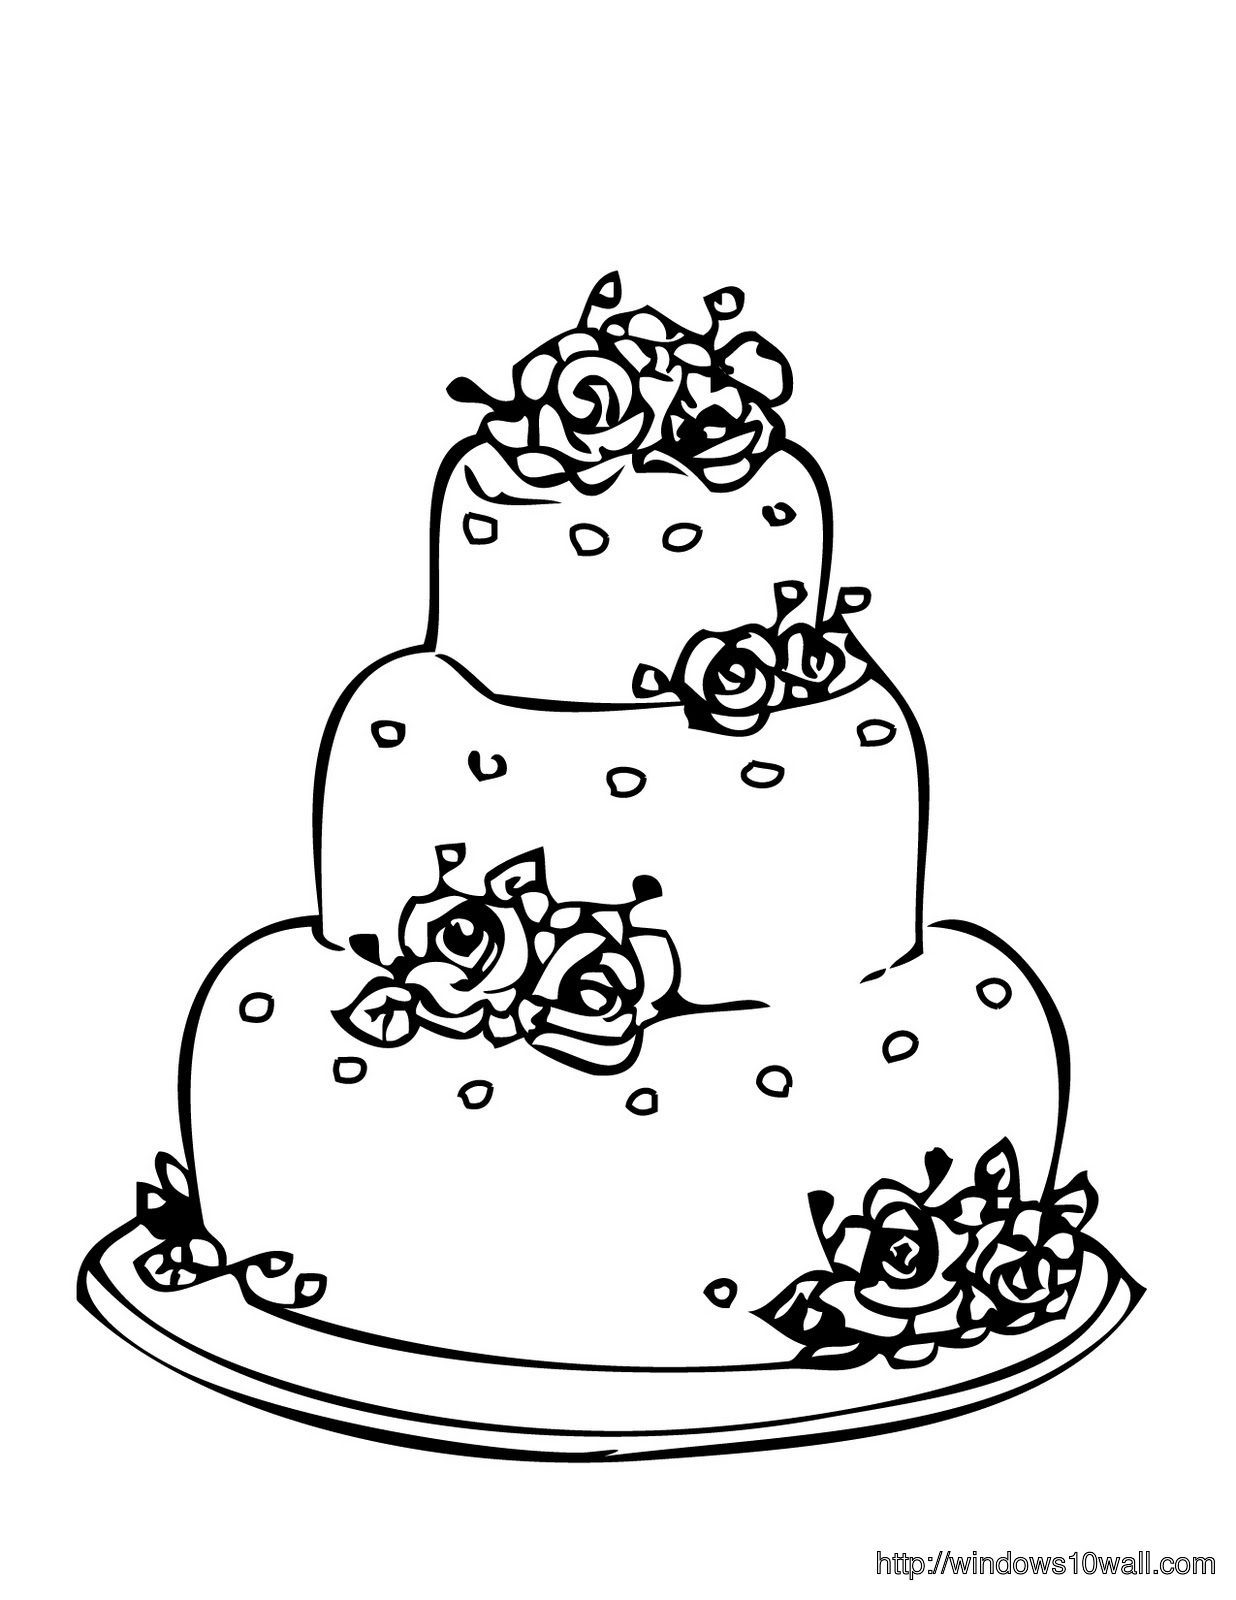 Cake Coloring Page for Kids Wallpaper